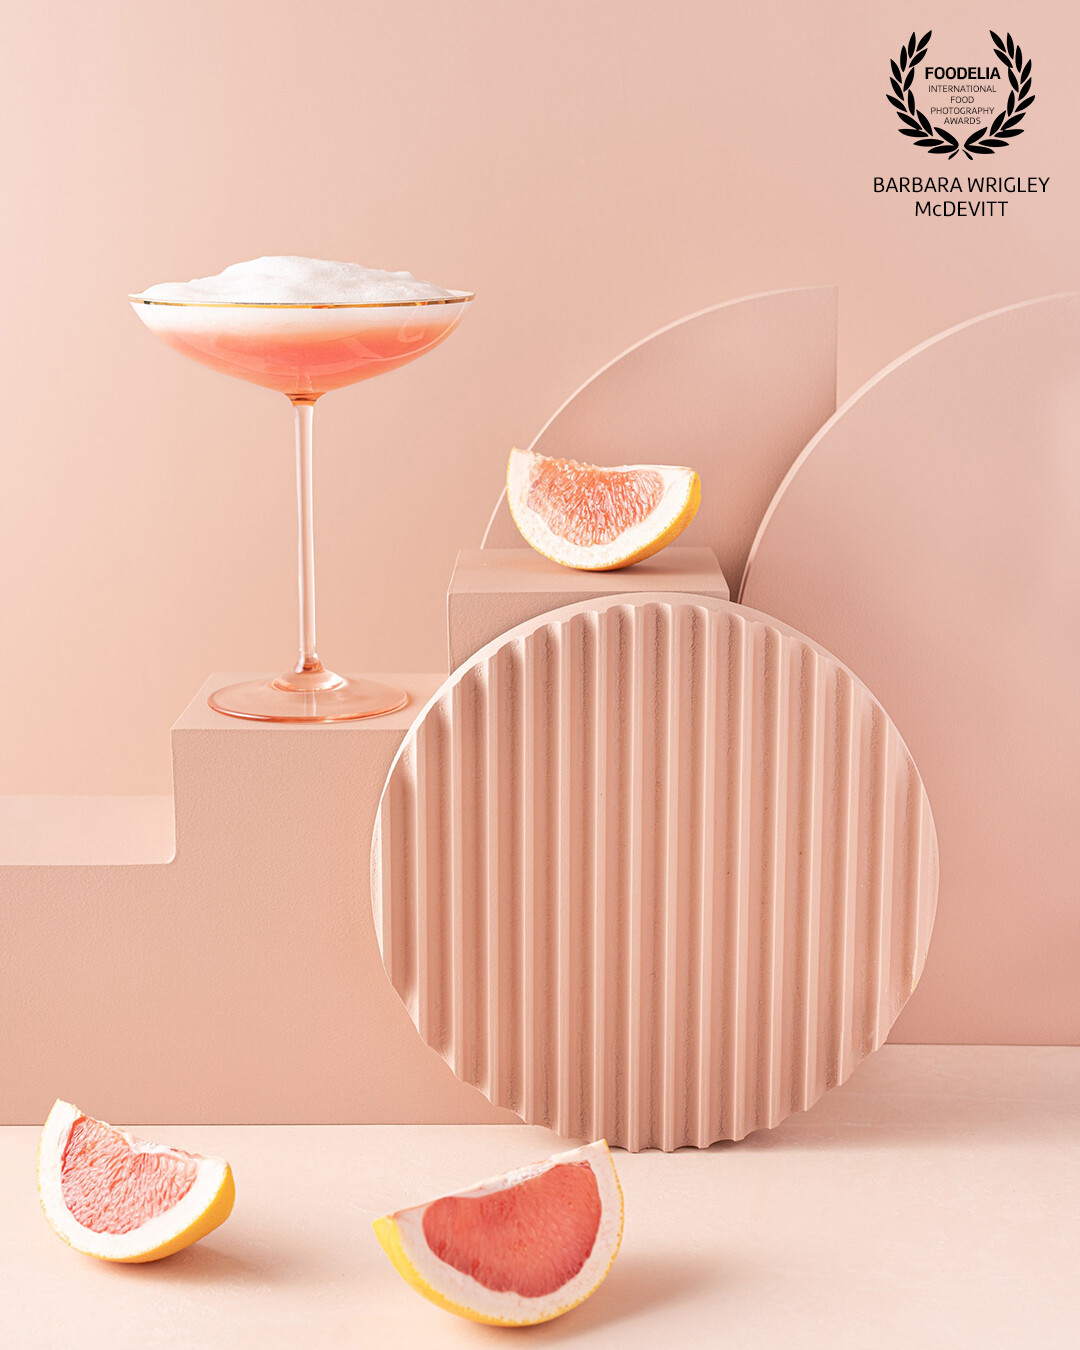 I wanted to create a monochromatic image for a grapefruit cocktail I'm fond of.  So I went with these wonderful shapes from @ericksonsurfaces, some fresh grapefruit slices and my cocktail, of course.  Shot on a Nikon z7ii with Profoto B2 lighting.